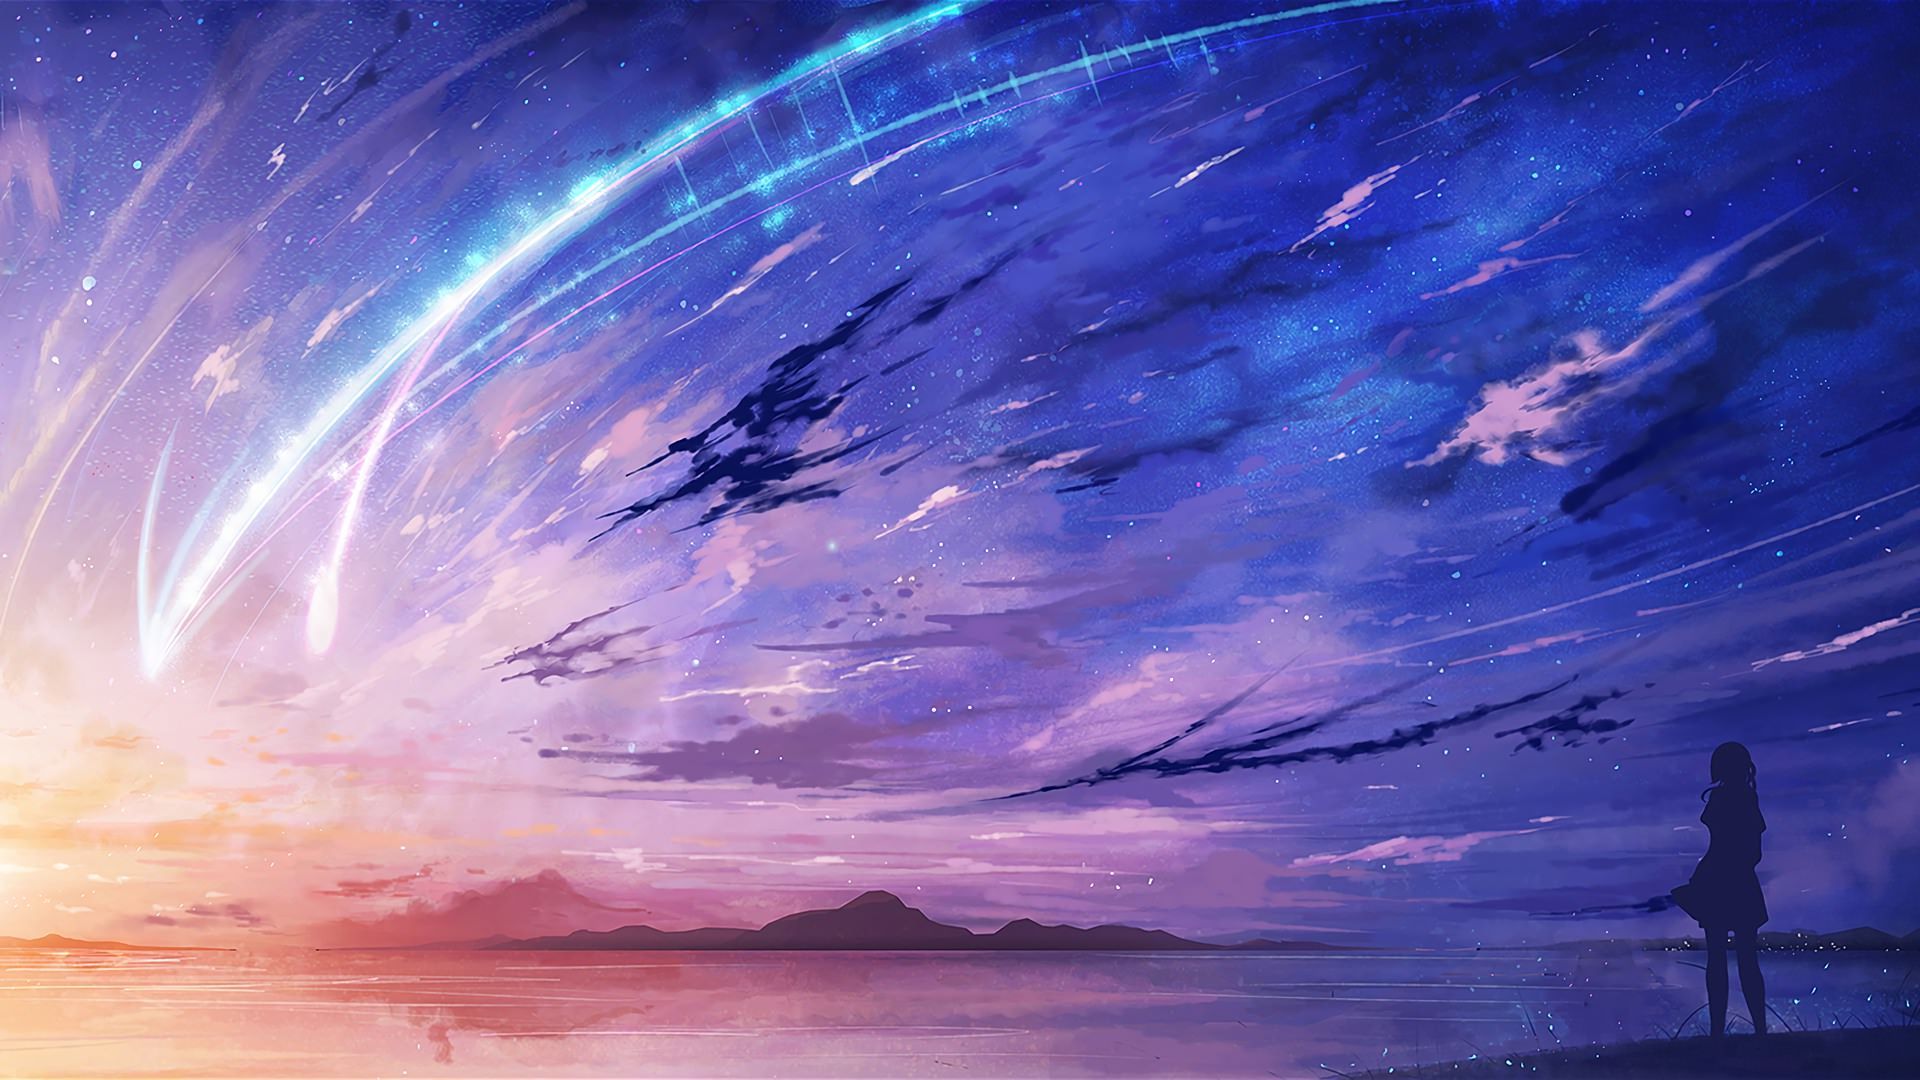 Your Name Anime Landscape Wallpaper Free Your Name Anime Landscape Background - Landscape wallpaper, Scenery wallpaper, Anime scenery